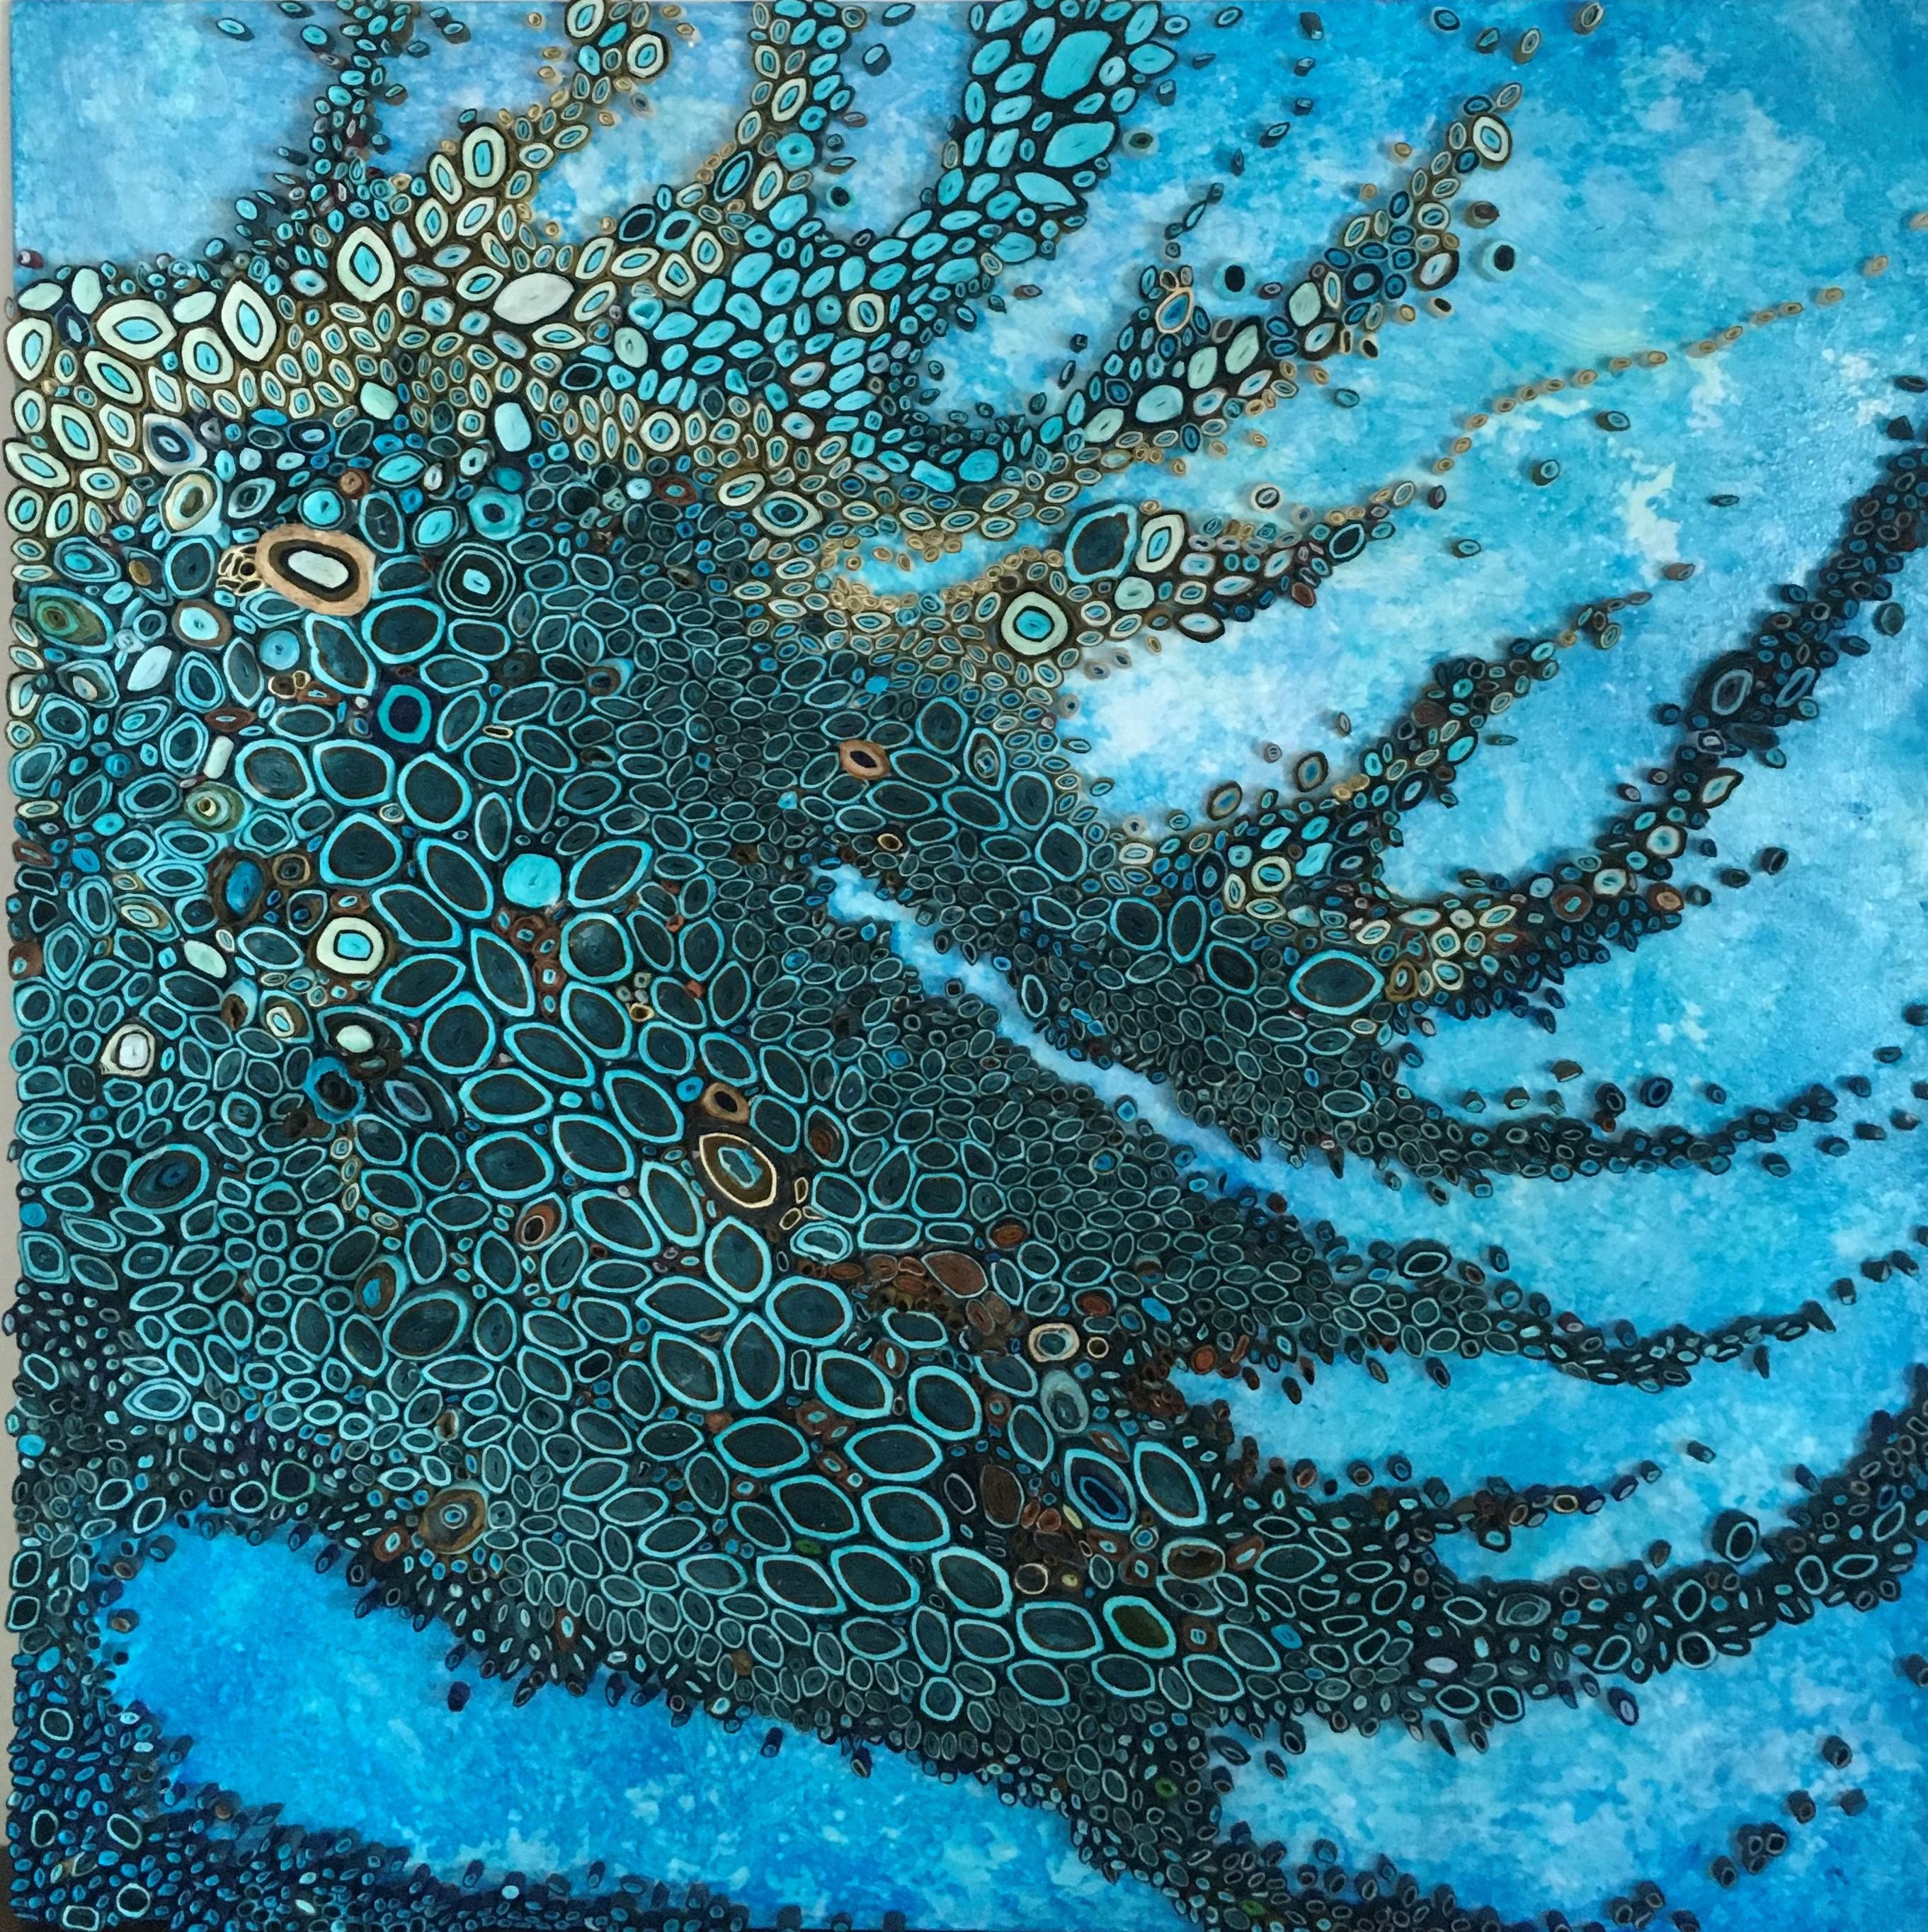 Boneyard, Dimensional artwork, Water, blue, framed, rolled paper, quilling - Contemporary Art by Amy Genser